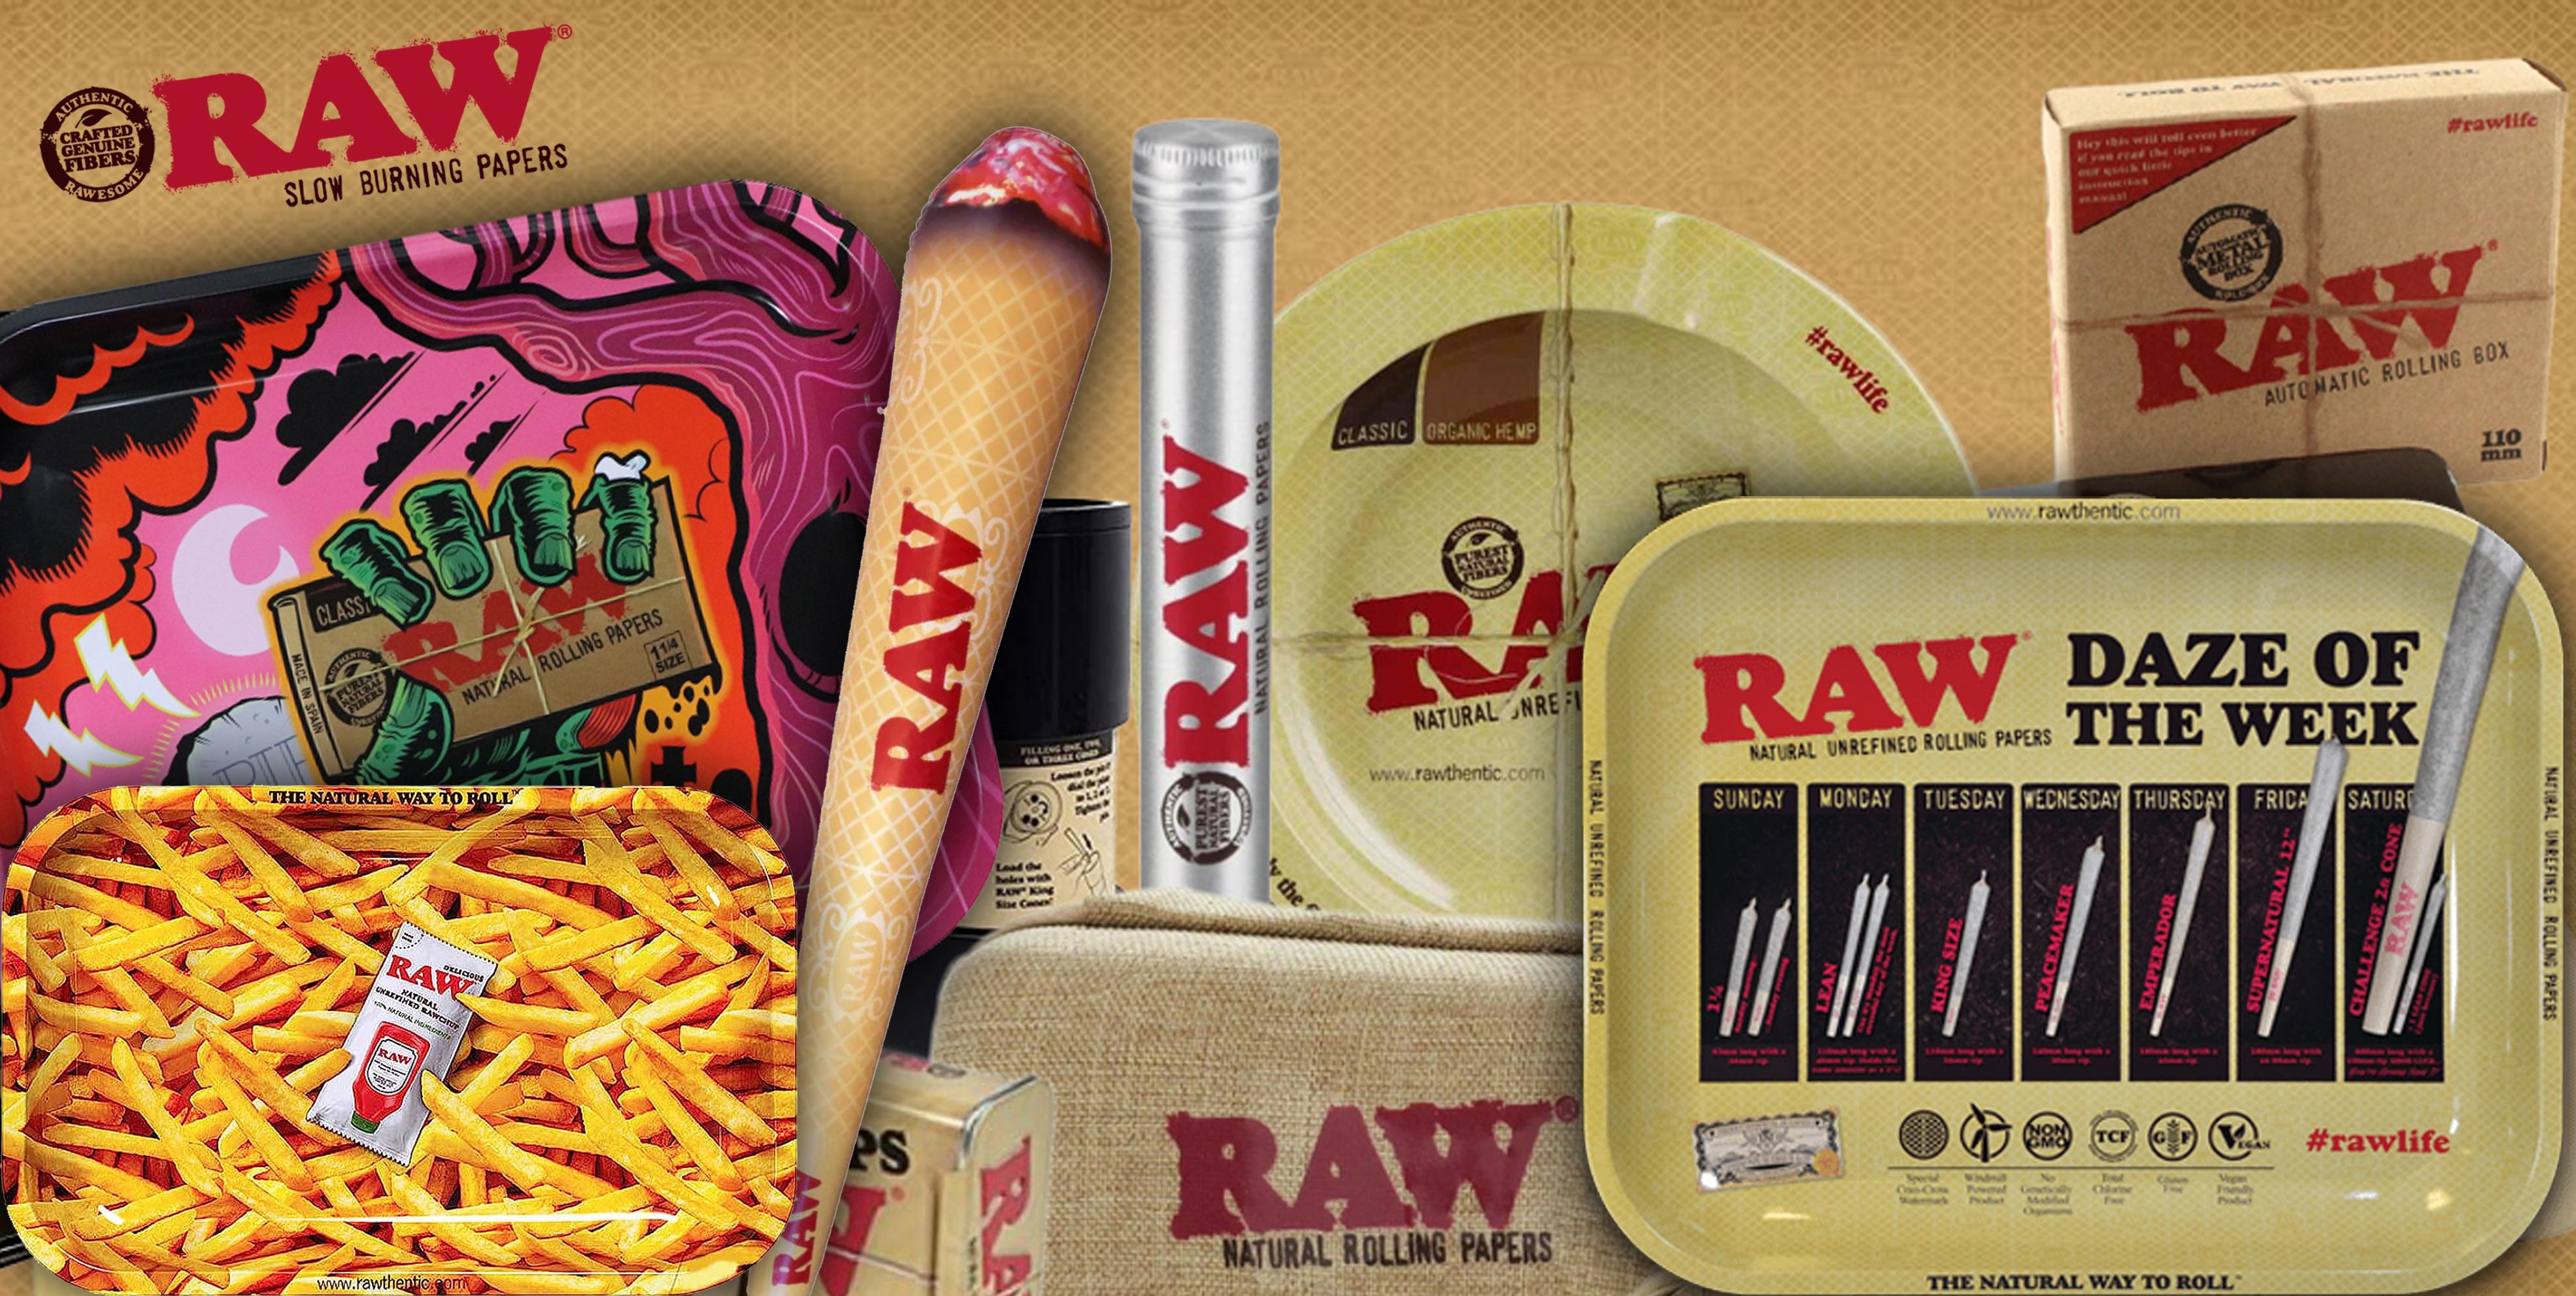 Raw products